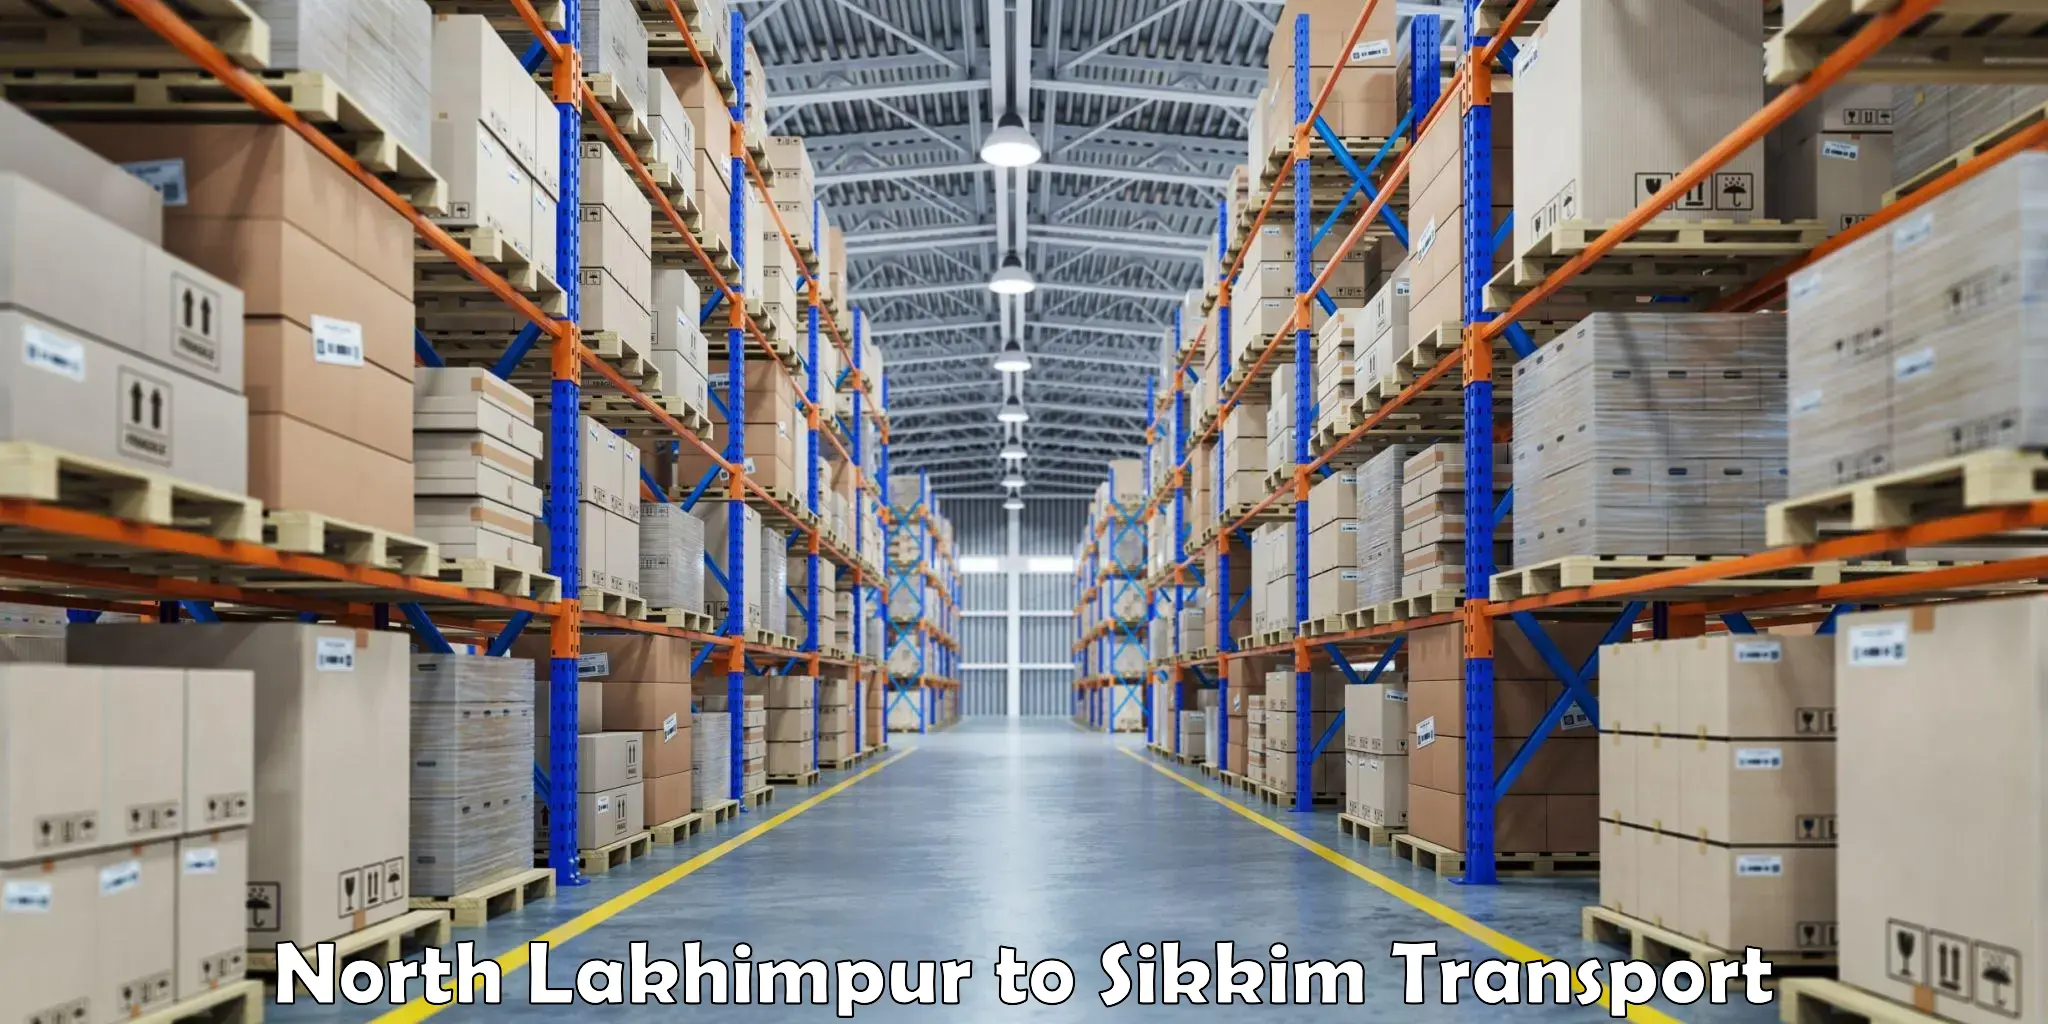 Daily transport service North Lakhimpur to Jorethang